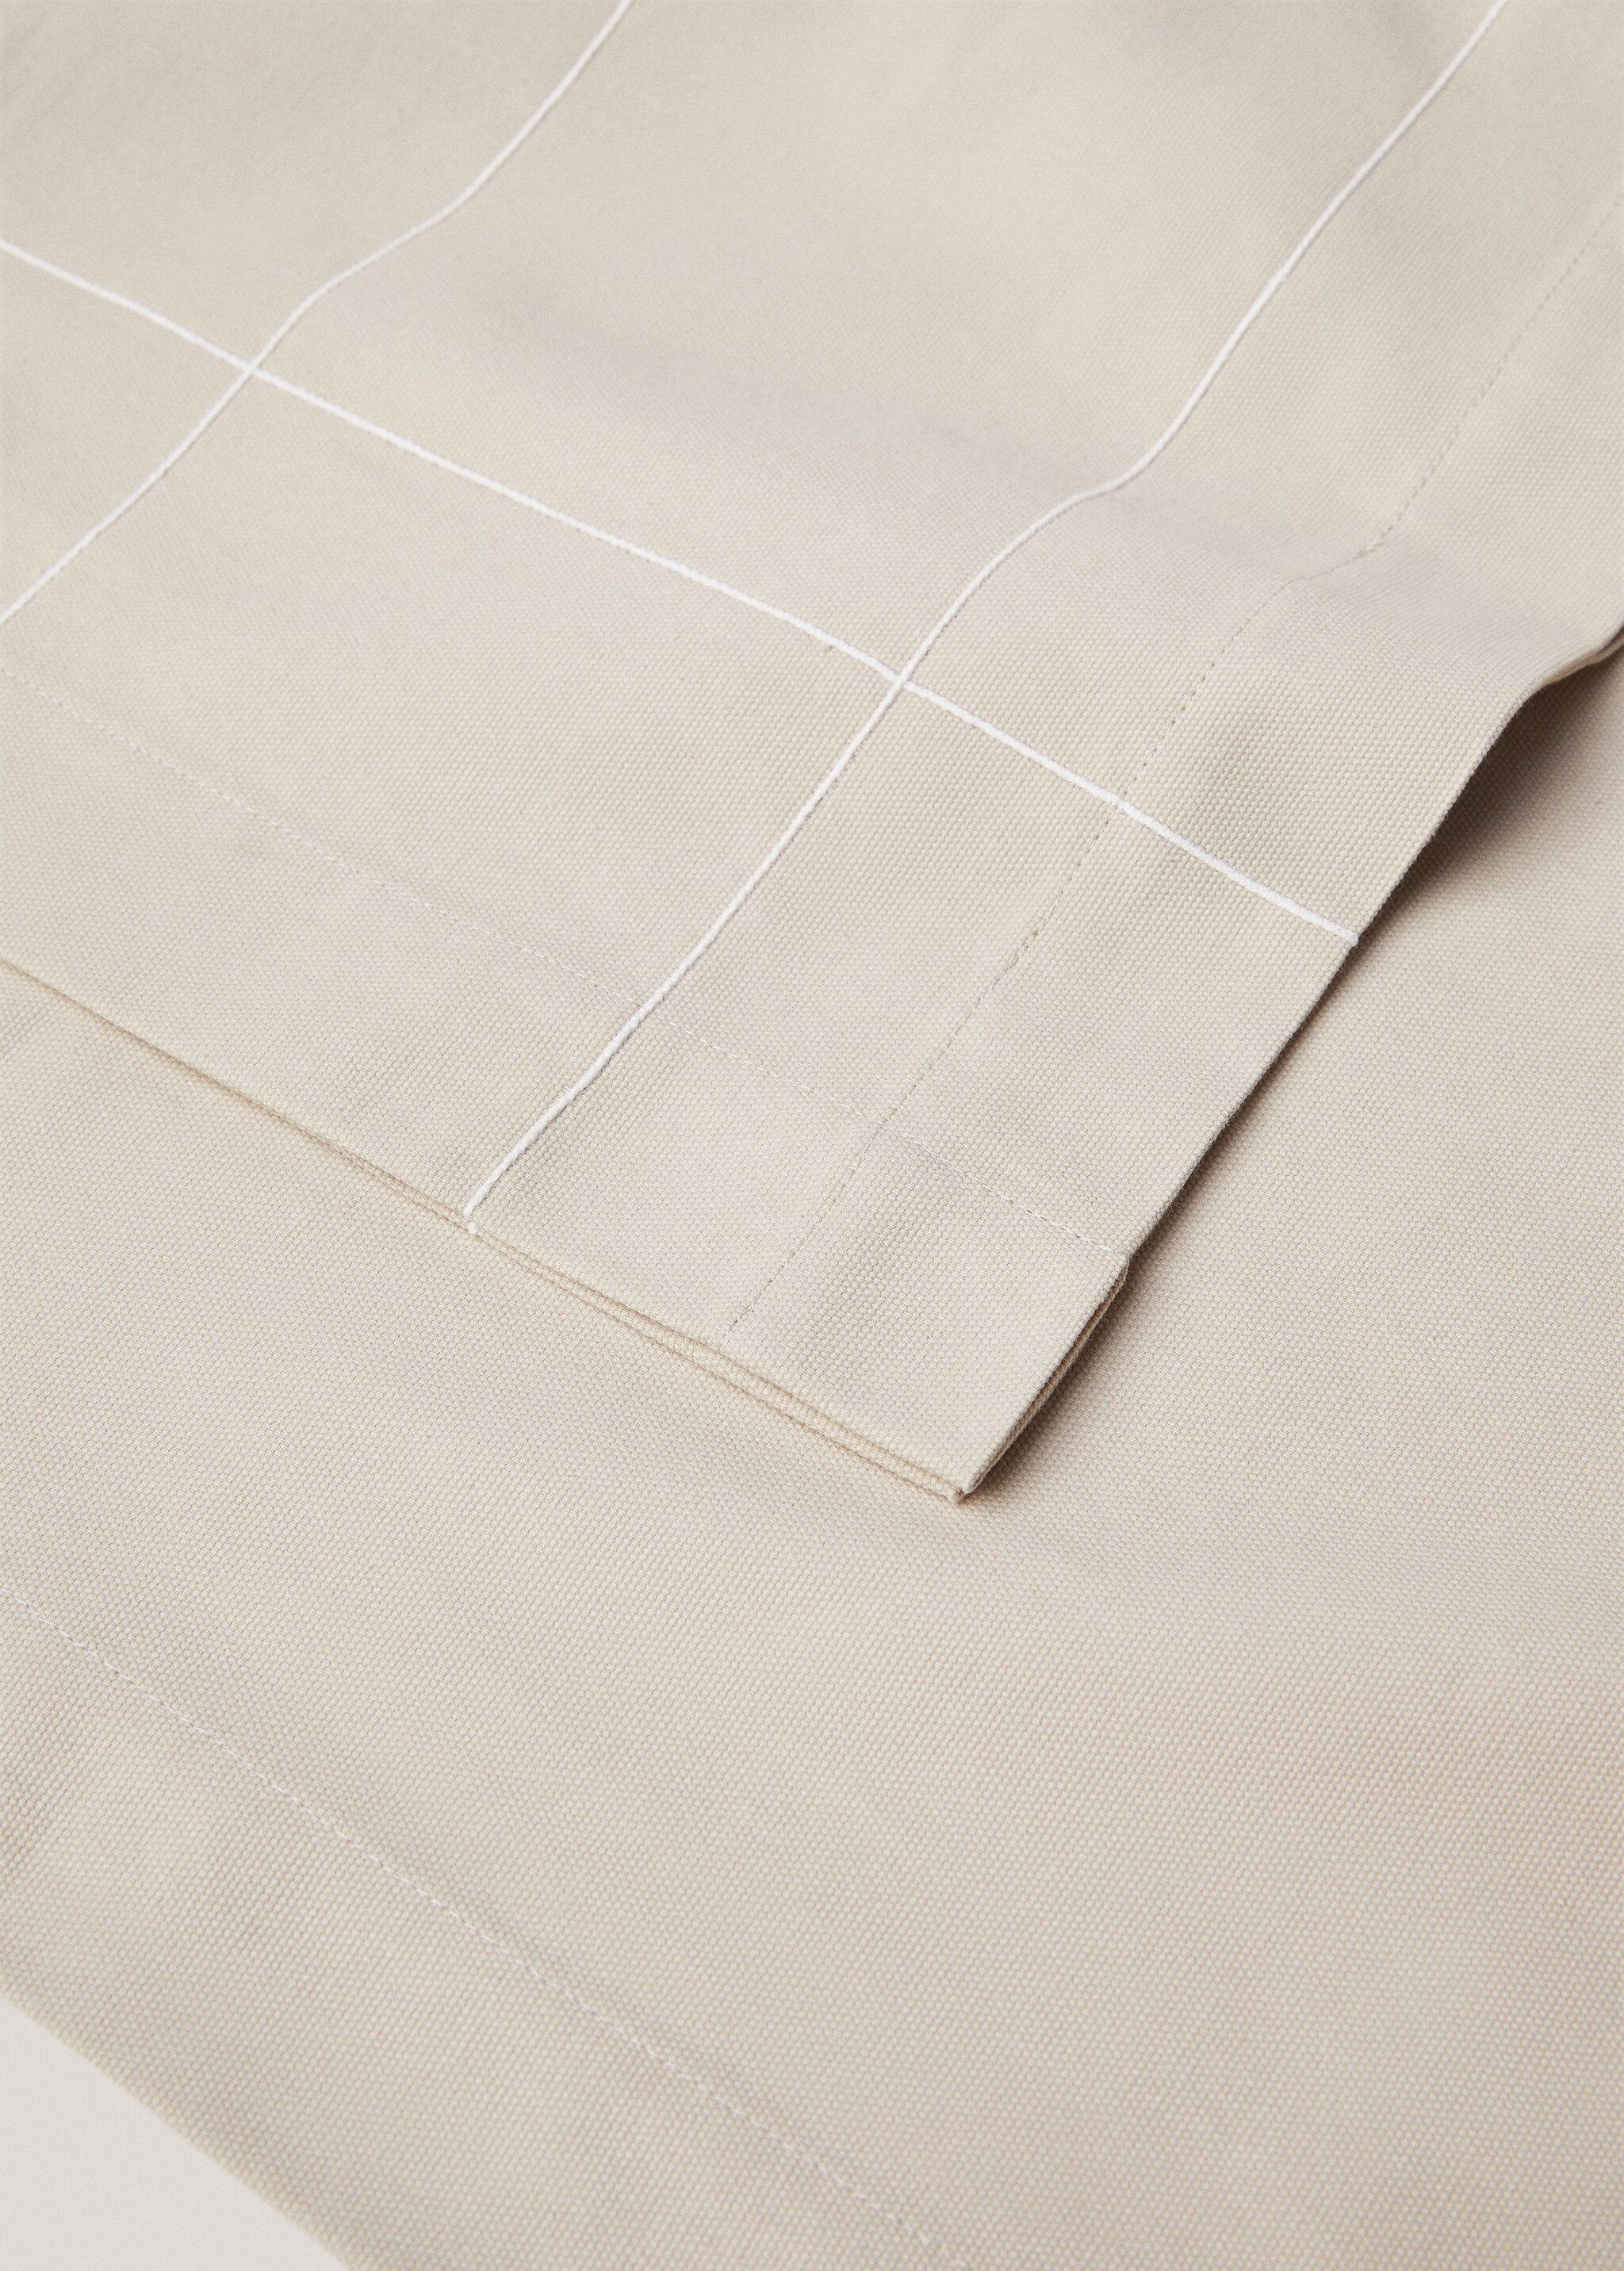 Cotton quilt with embroidered lines - Details of the article 1